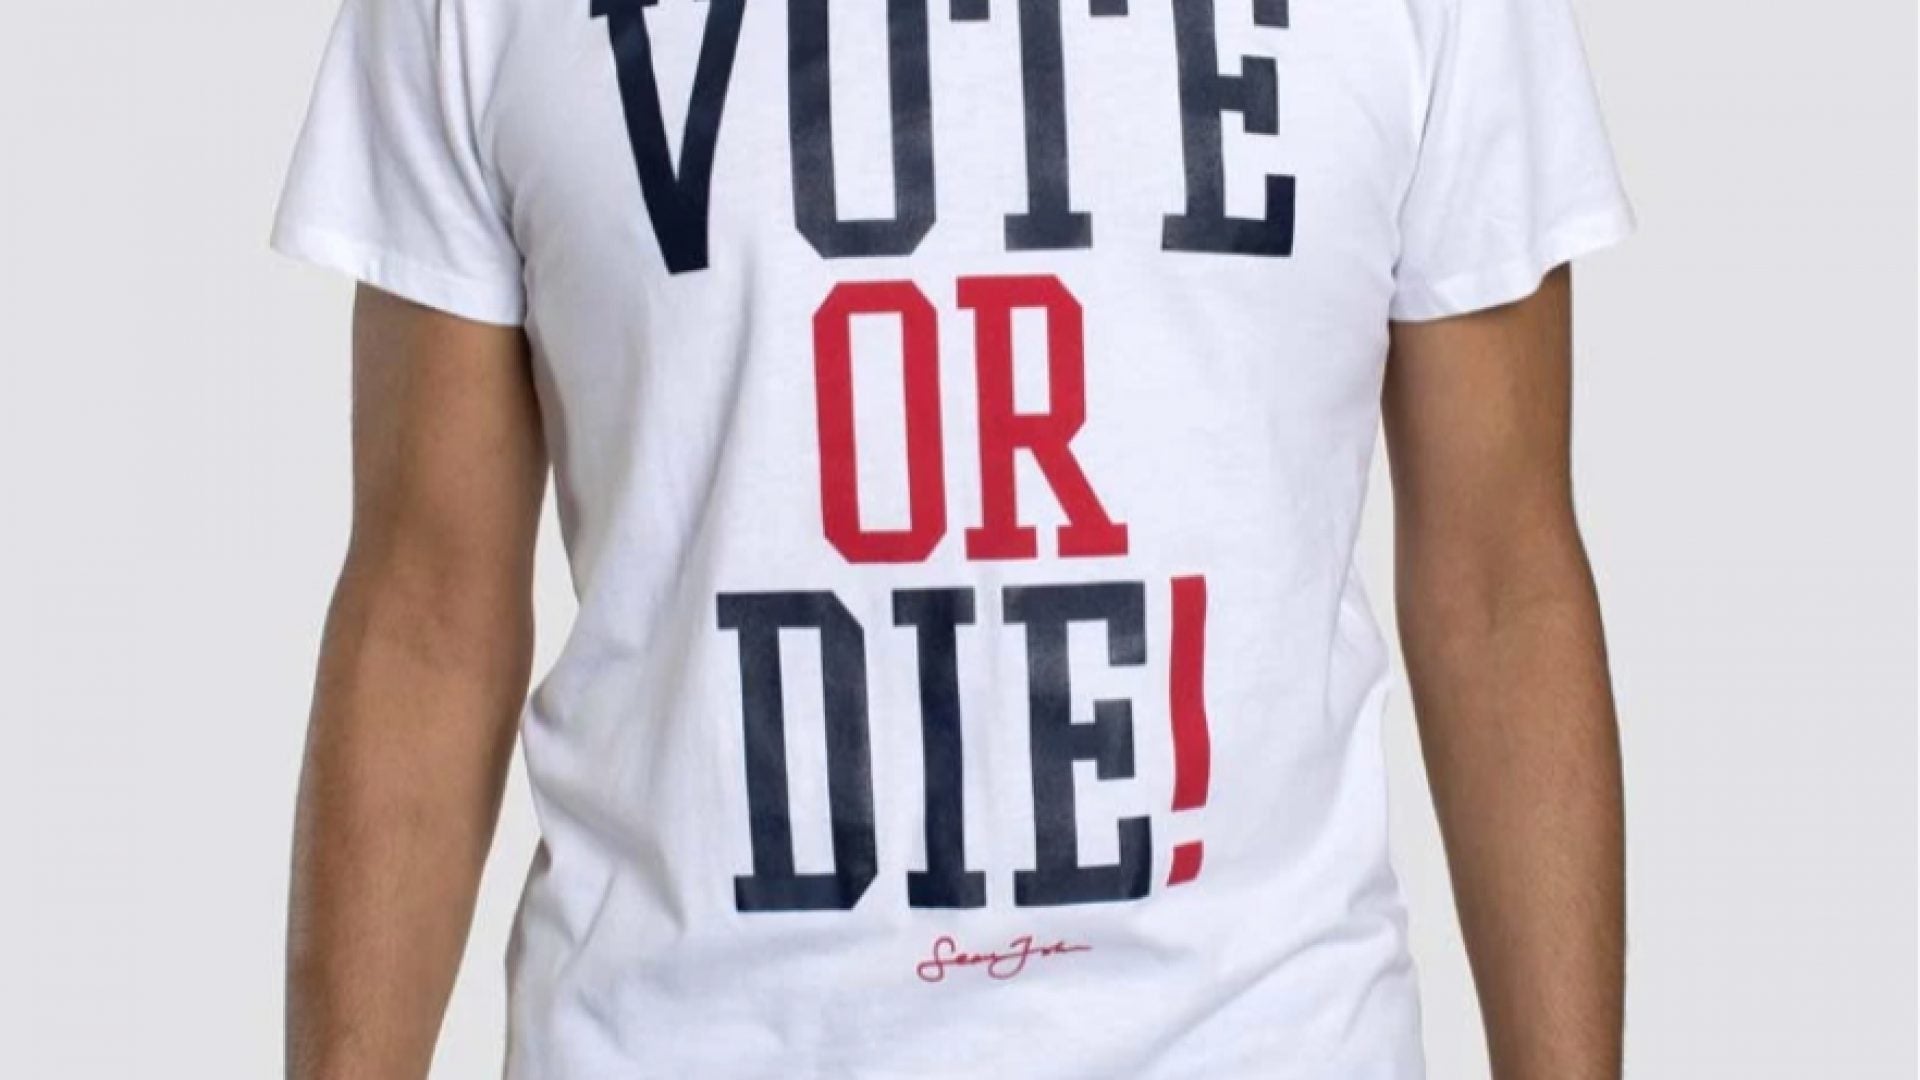 Shop Now: Sean Jean Relaunches Popular 'Vote Or Die" Tee